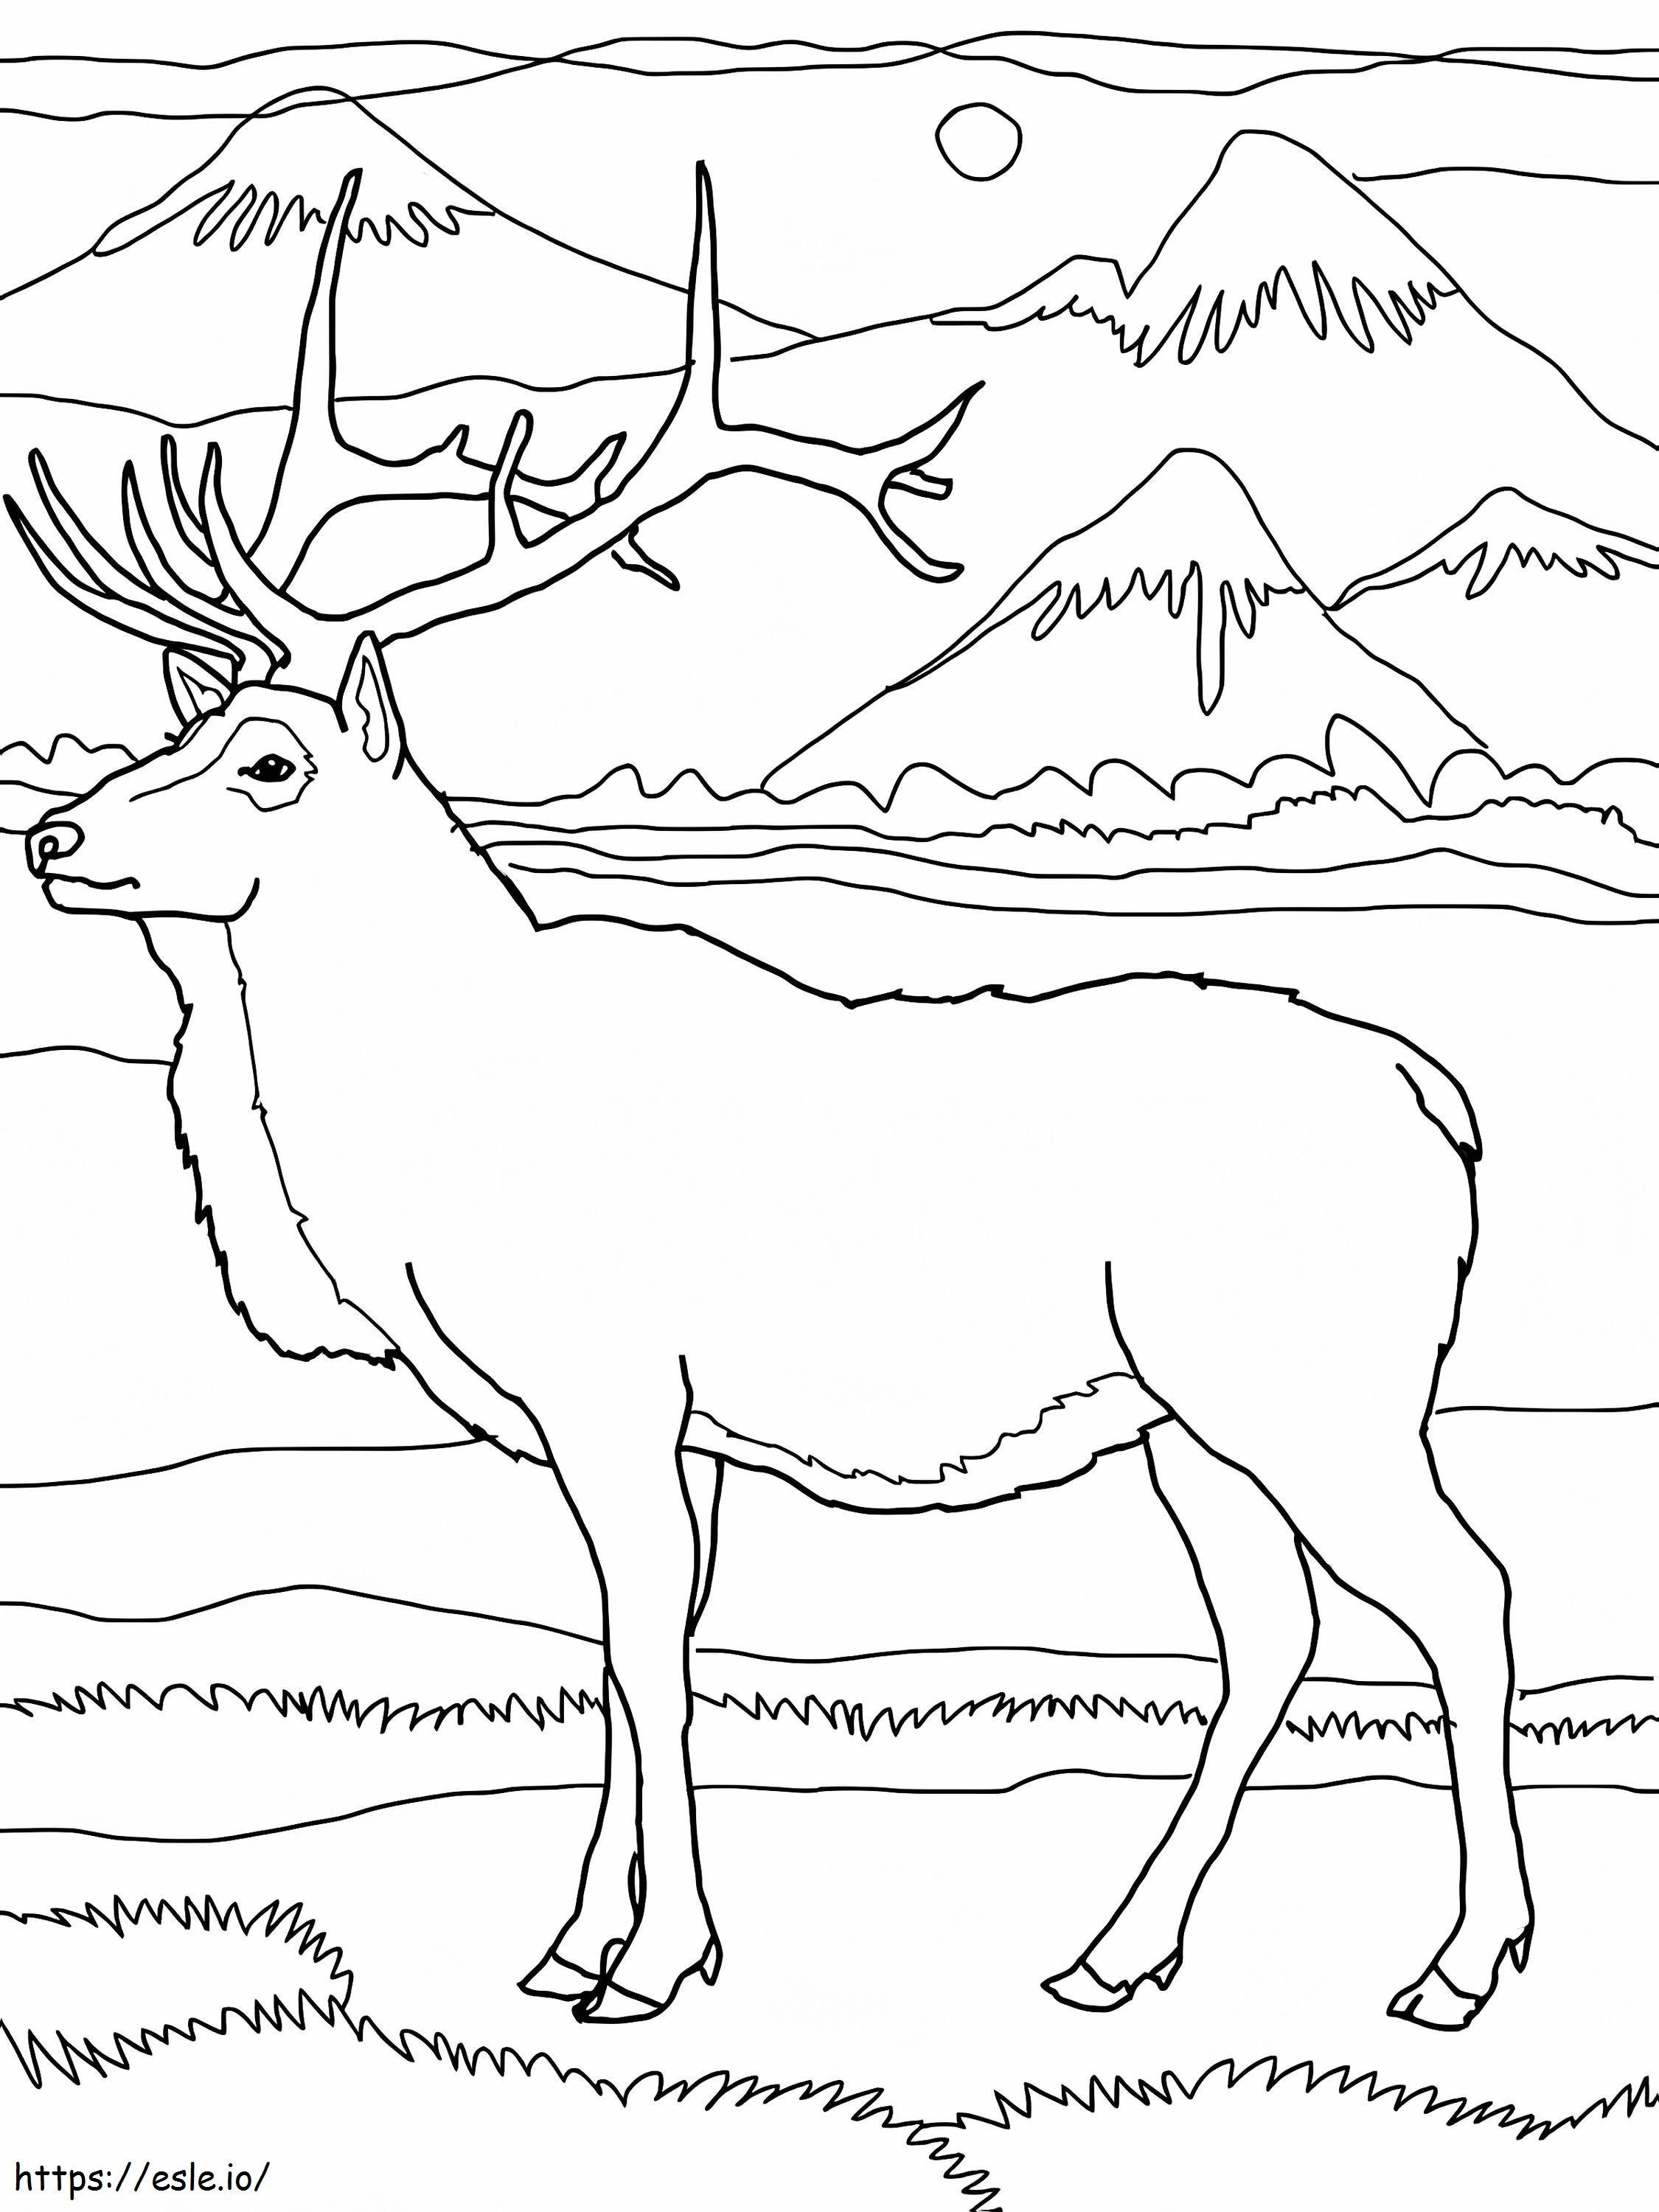 Moose Up The Mountain coloring page